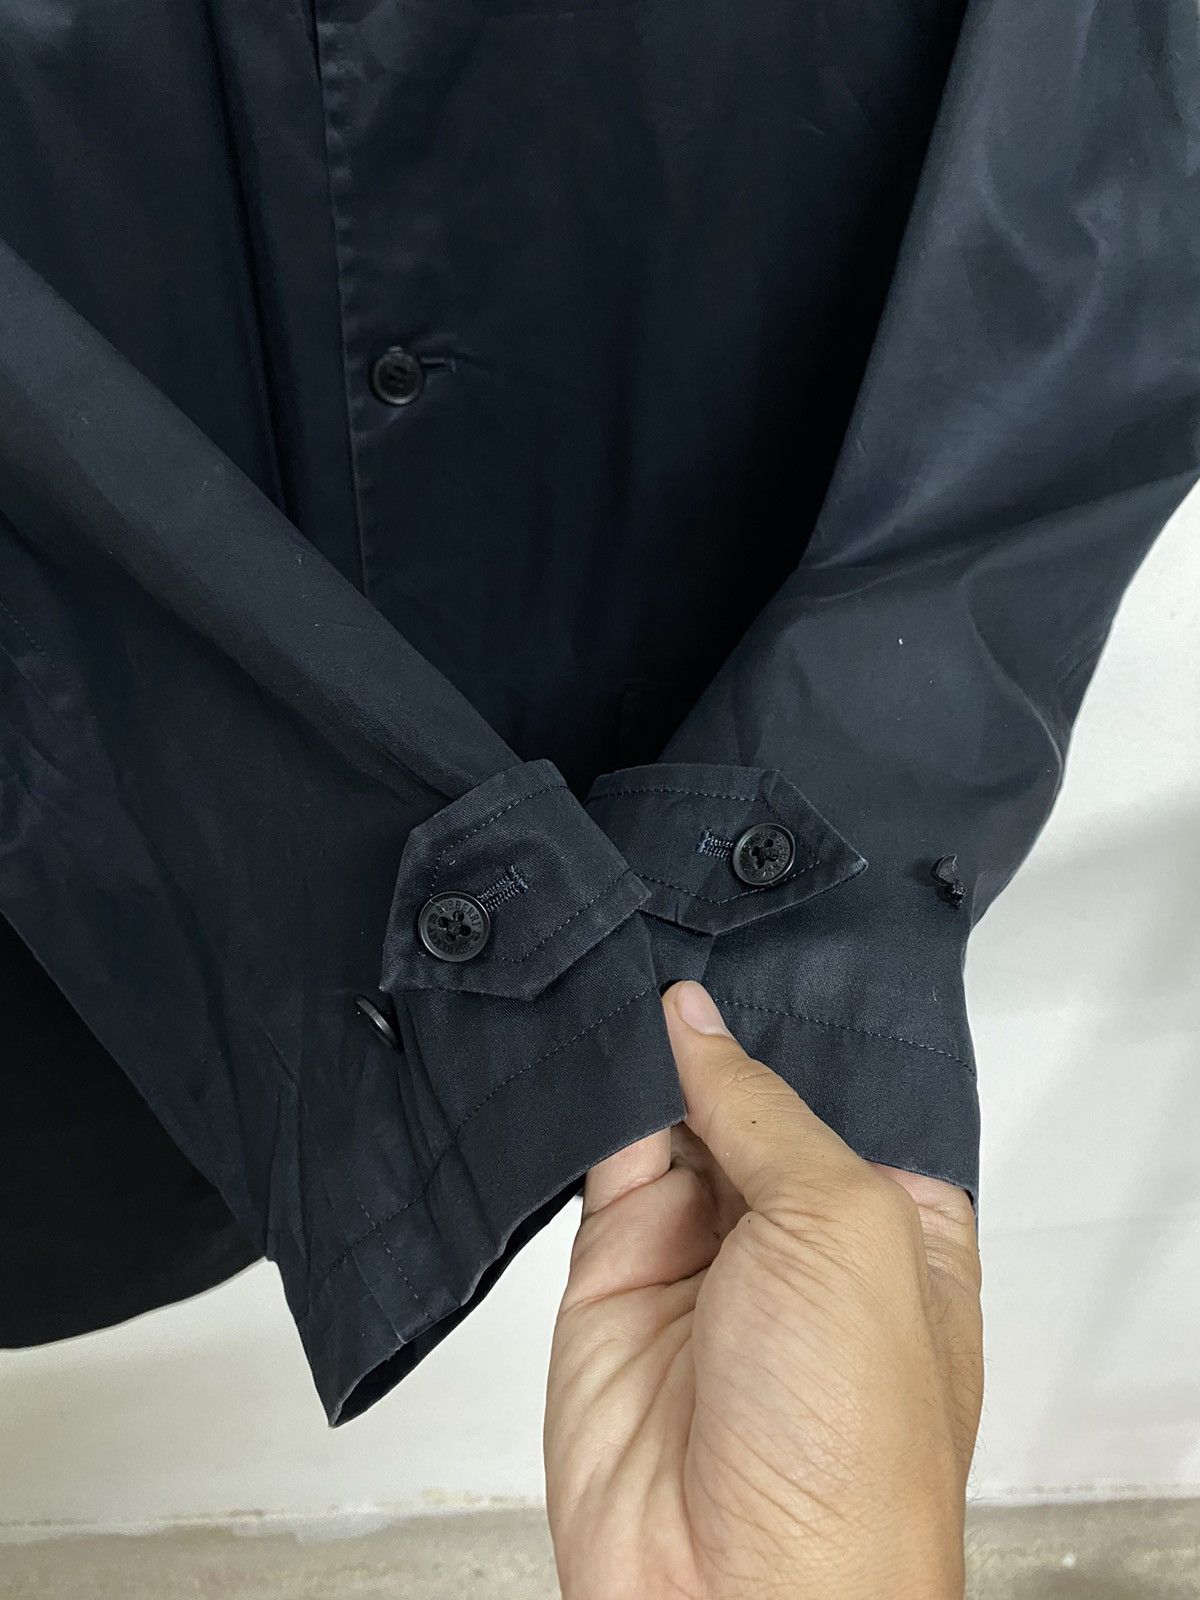 Burberry Black Label Single Breasted Trench Coat Jacket - 4